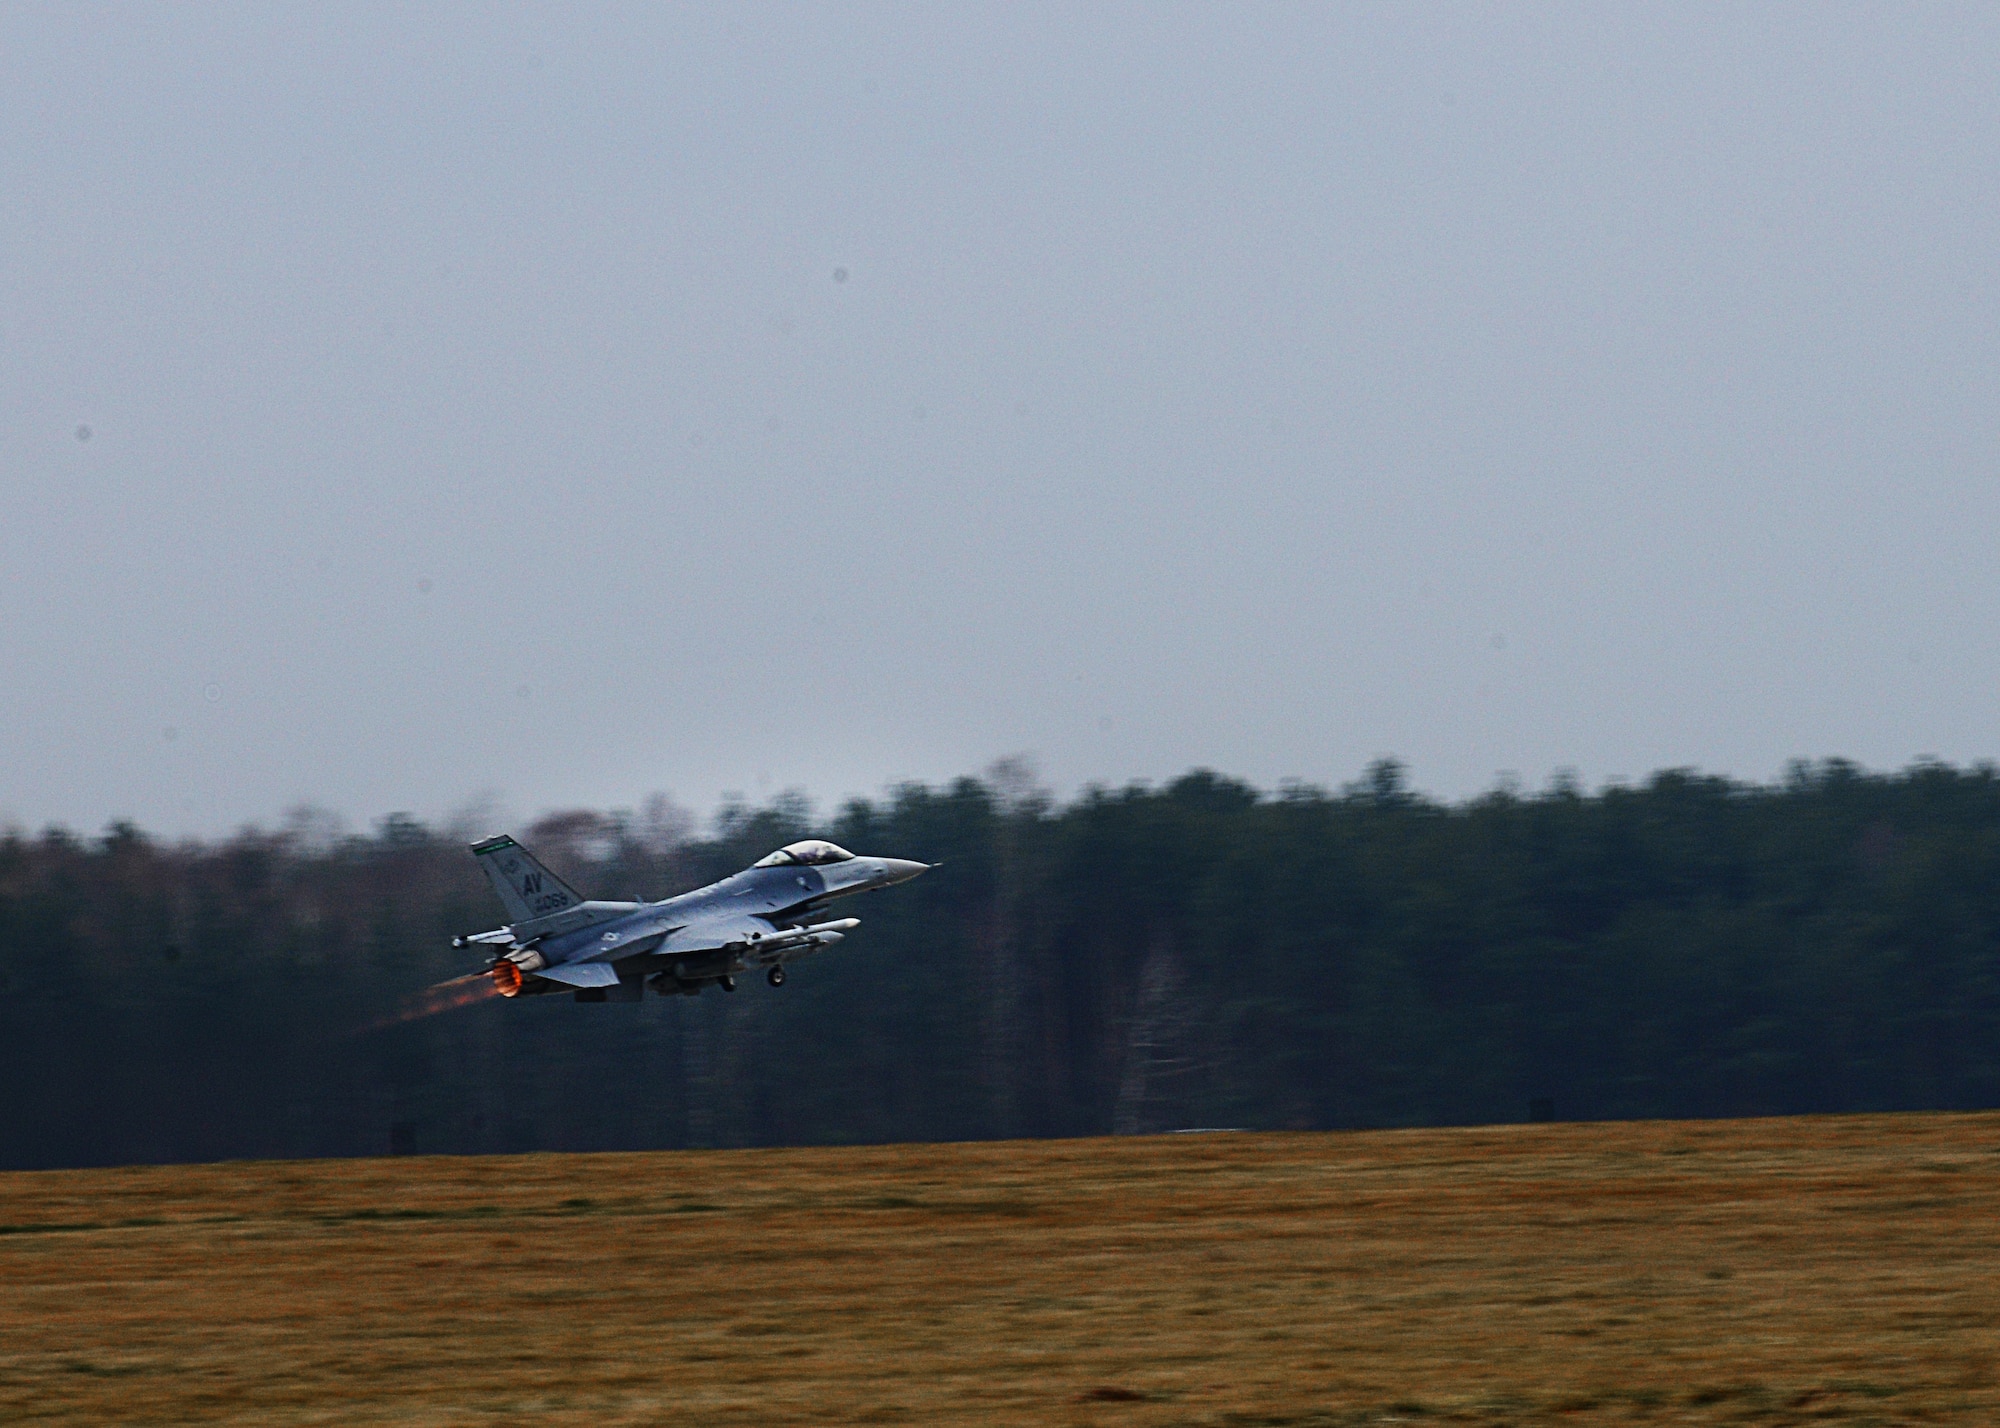 A 555th Fighter Squadron F-16 Fighting Falcon takes off for a training mission, March 18, 2014, at Lask Air Base, Poland. The aerial training exercises a pilot’s ability to operate across a range of military operations with precise full-spectrum capabilities. (U.S. Air Force photo/Airman 1st Class Ryan Conroy) 

